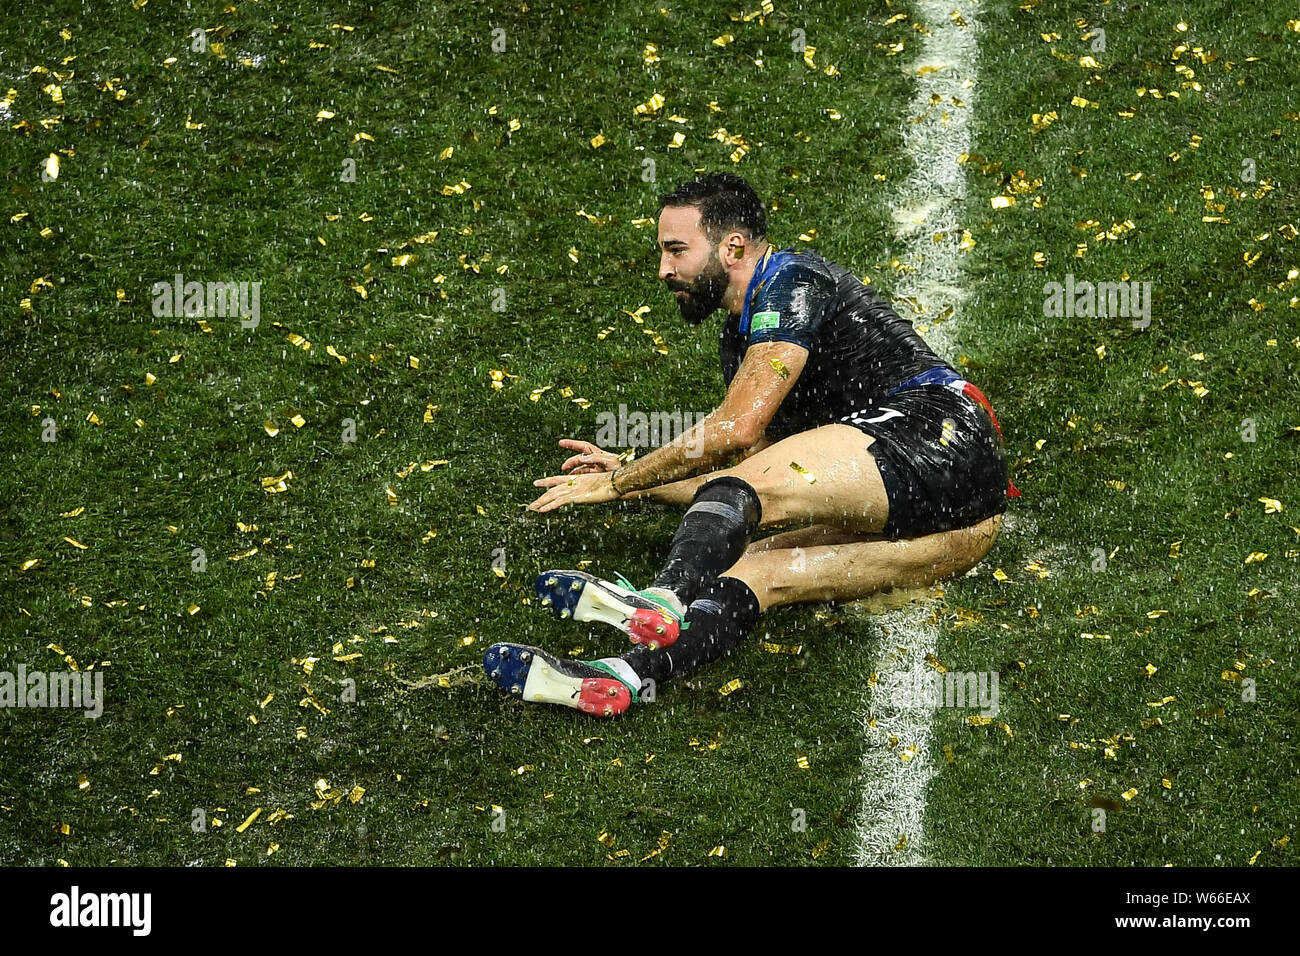 Adil Rami of France slides on the lawn to celebrate after France defeated Croatia in their final match during the 2018 FIFA World Cup in Moscow, Russi Stock Photo